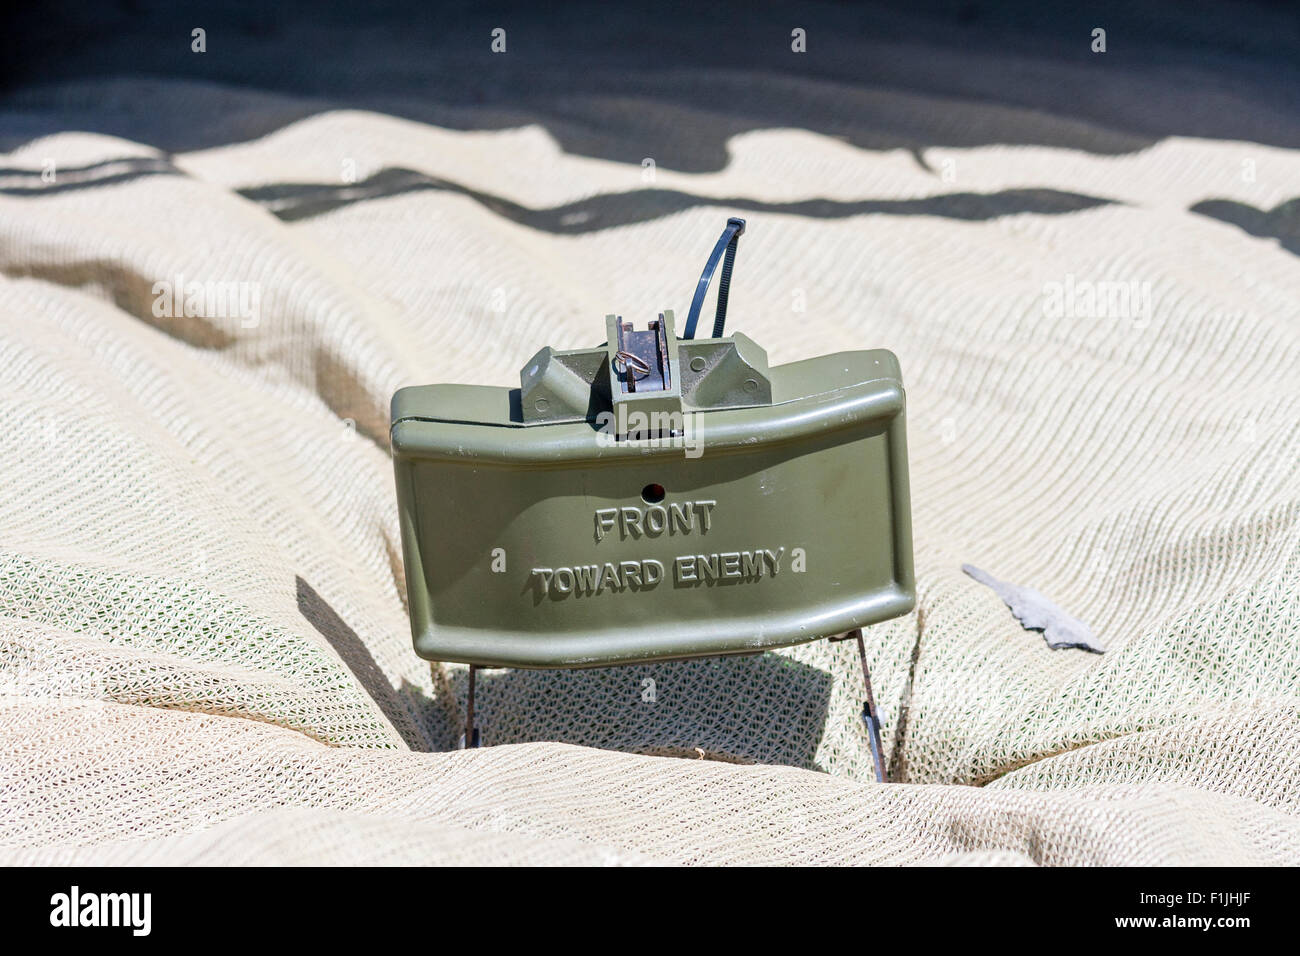 Vietnam re-enactment. American M18 anti-personnel Claymore mine positioned on ground with the M57 firing device, commonly called the 'clacker' Stock Photo